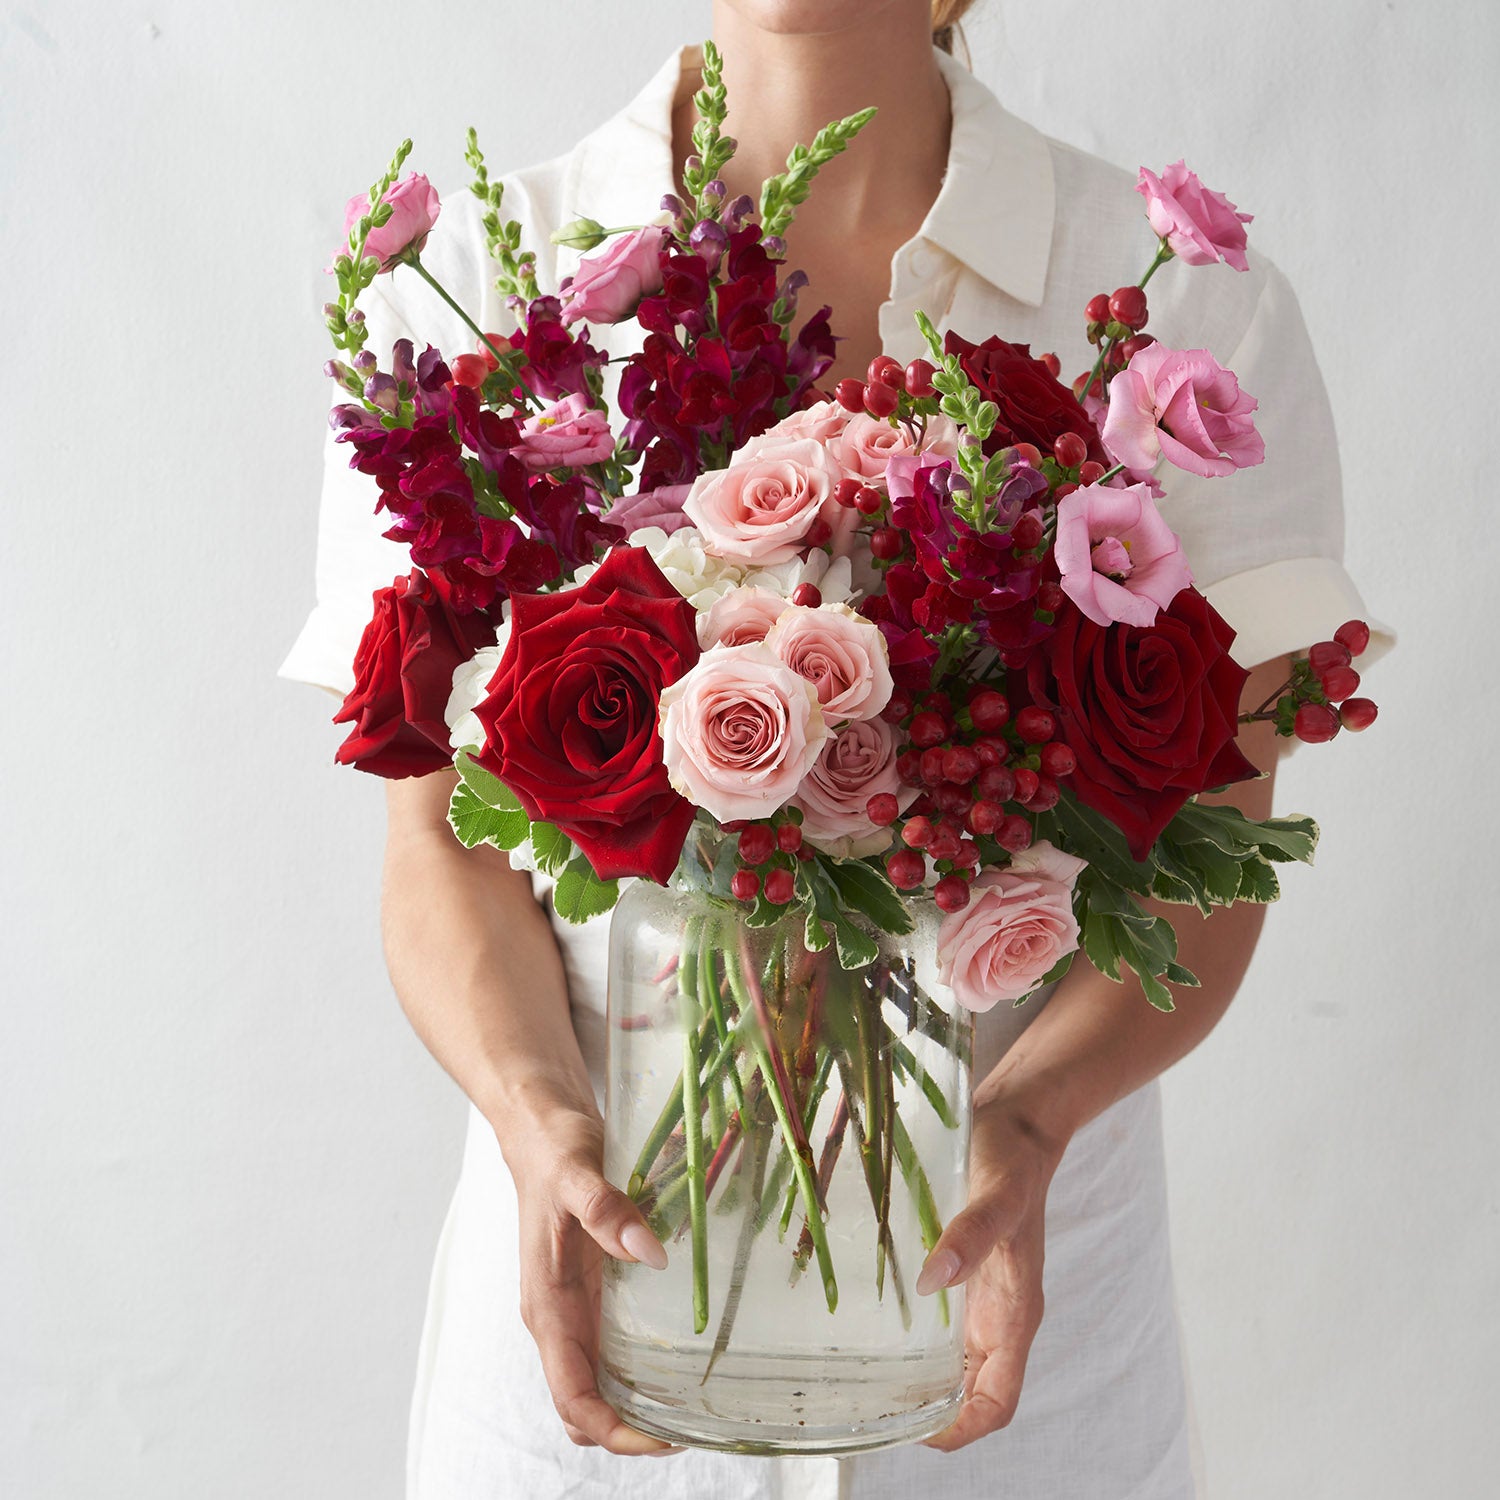 Woman wearing all white holding large red, pink, and red arrangement including roses, lisianthus and snapdragons.